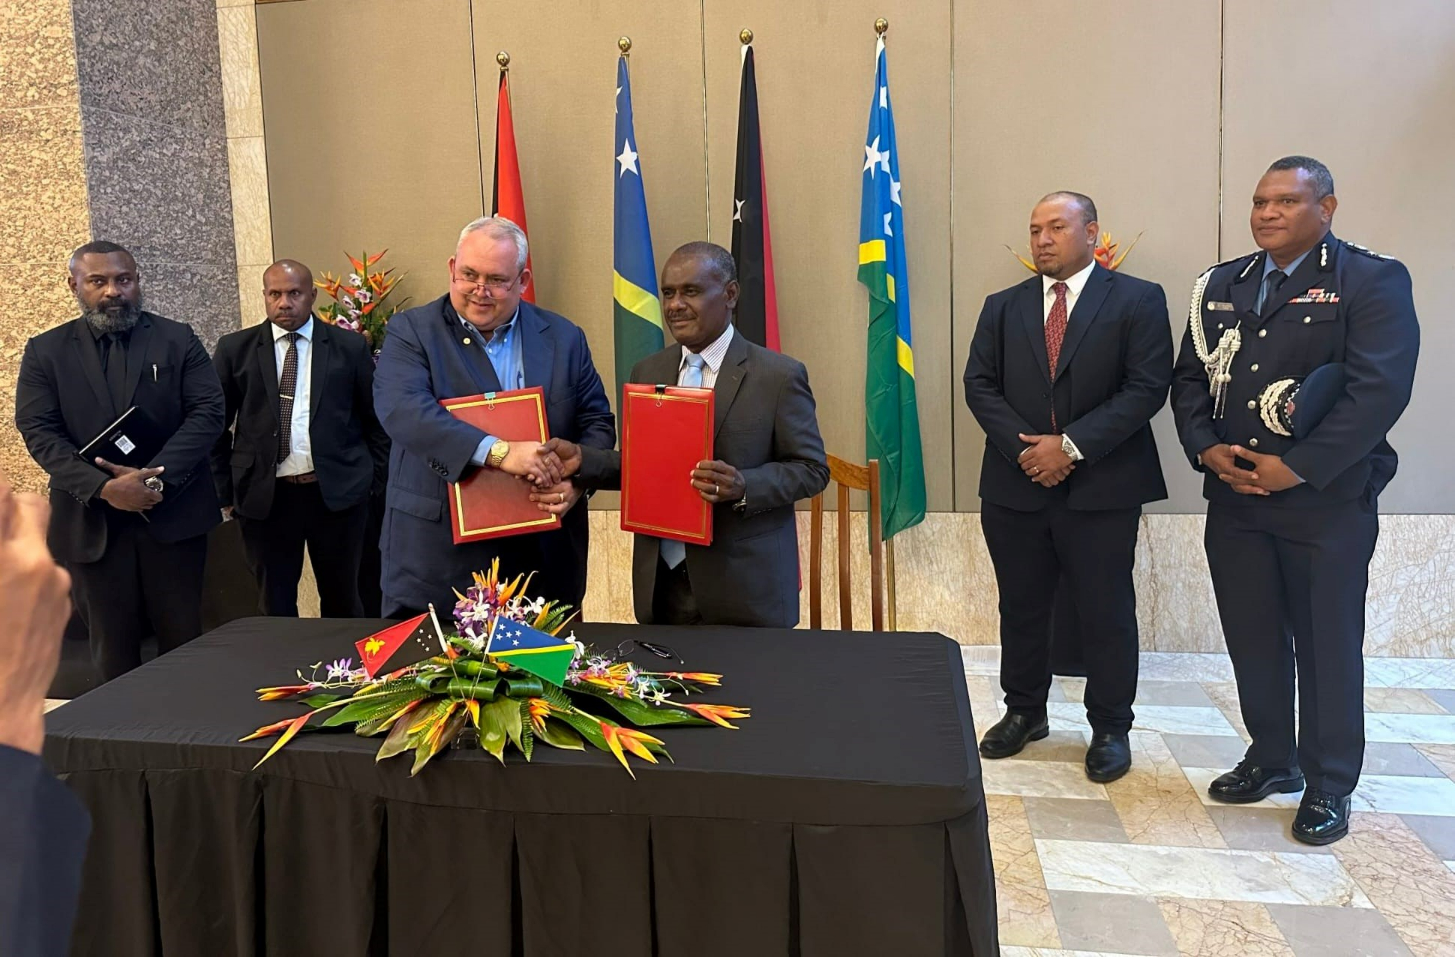 PNG Foreign Affairs Minister Hon. Justin Tkatchenko and SI Foreign Affairs & External Trade Minister, Hon. Jeremiah Manele shake hands after signing of the agreement